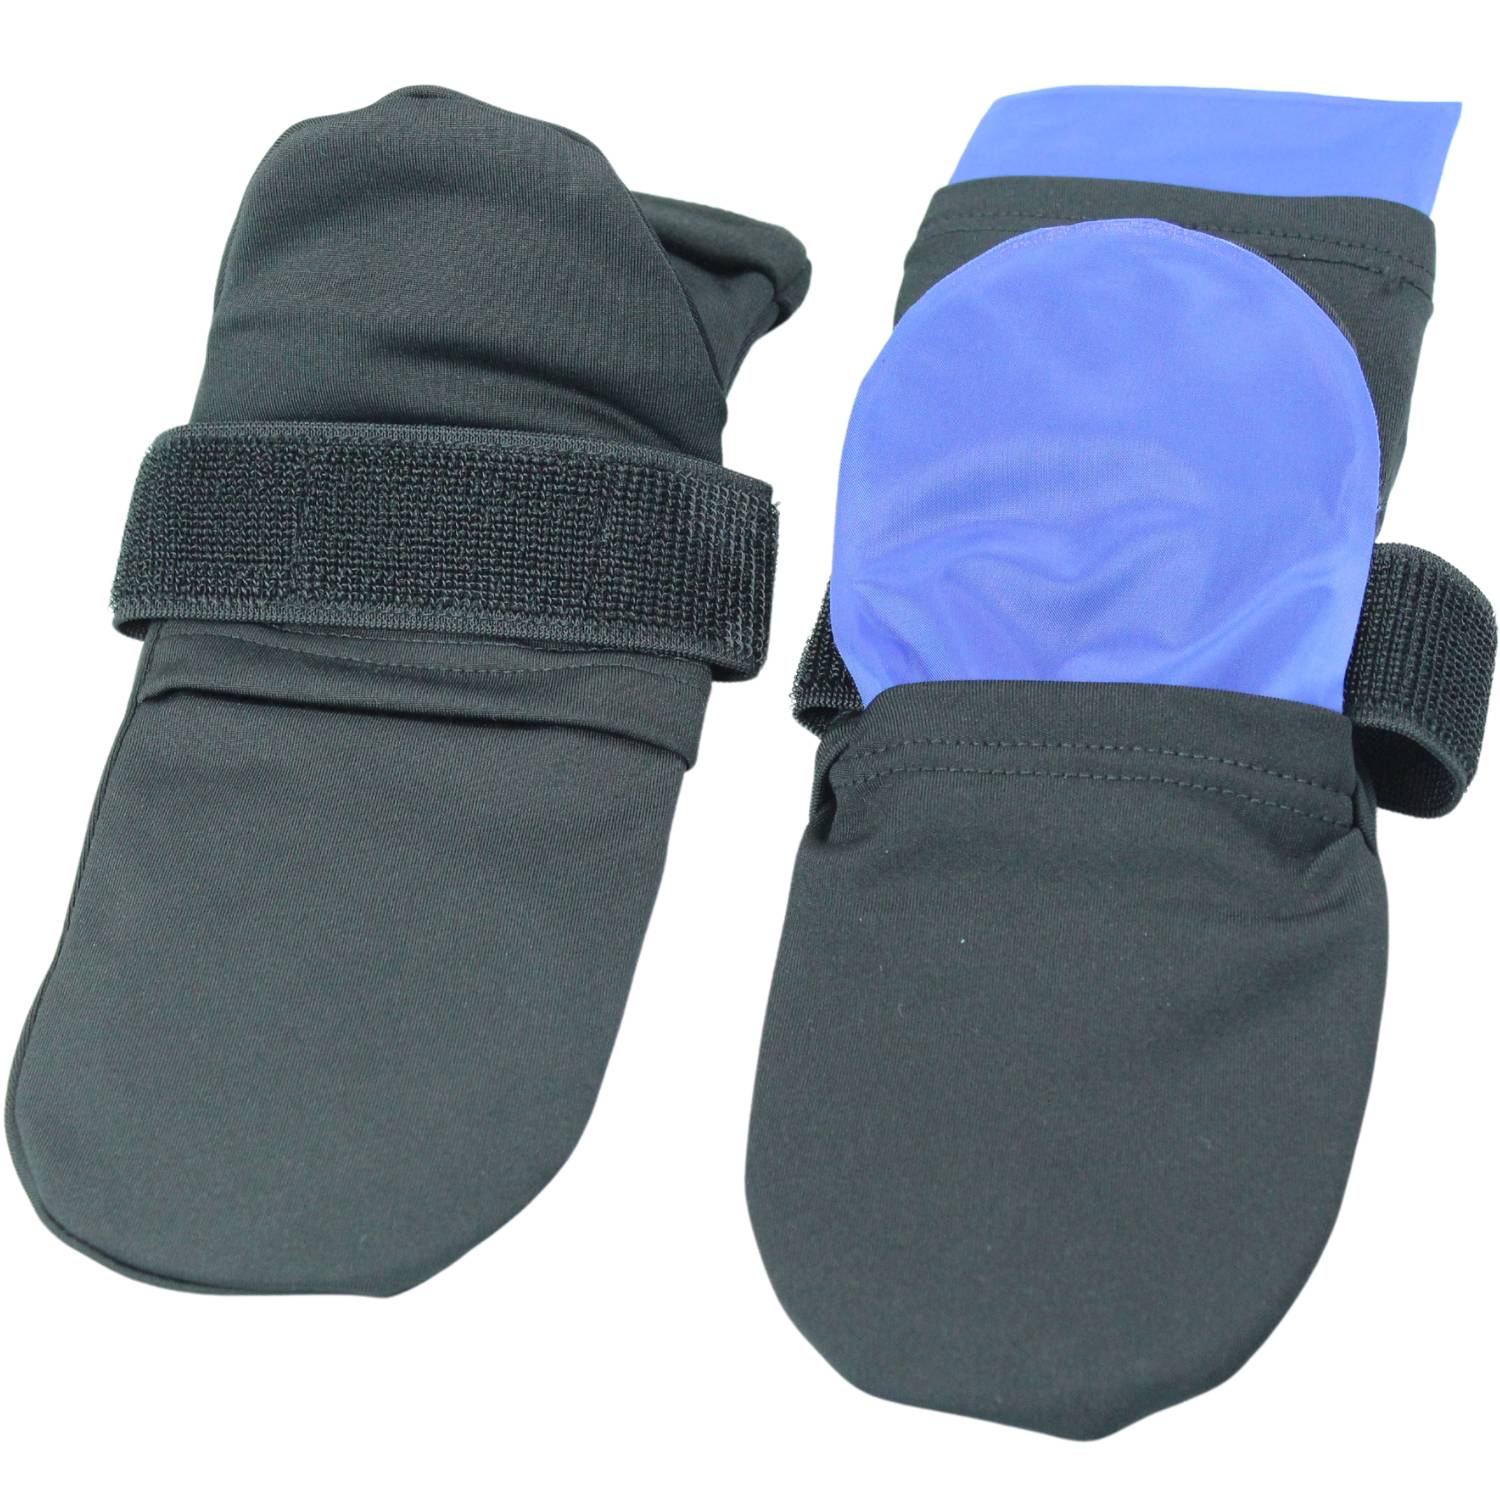 buy compression socks with ice packs